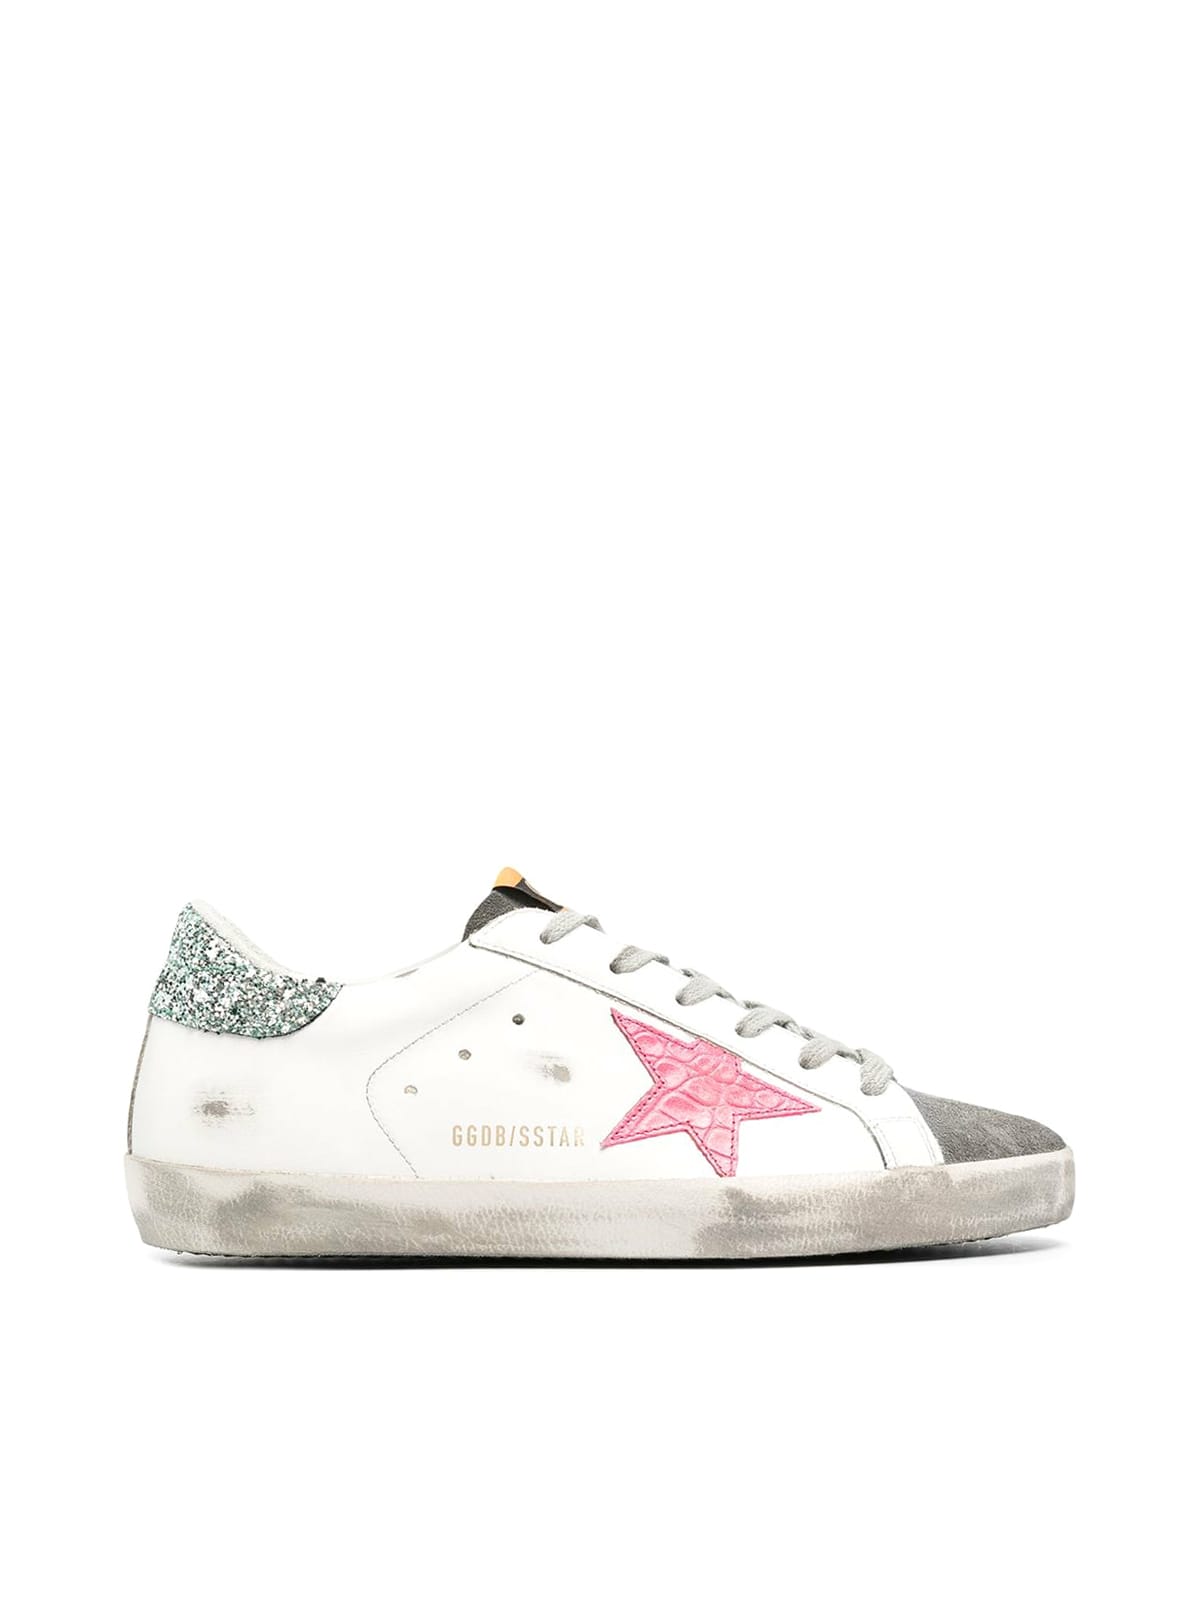 Buy Golden Goose Super-star Leather Upper Cocco Print Star Glitter Heel online, shop Golden Goose shoes with free shipping